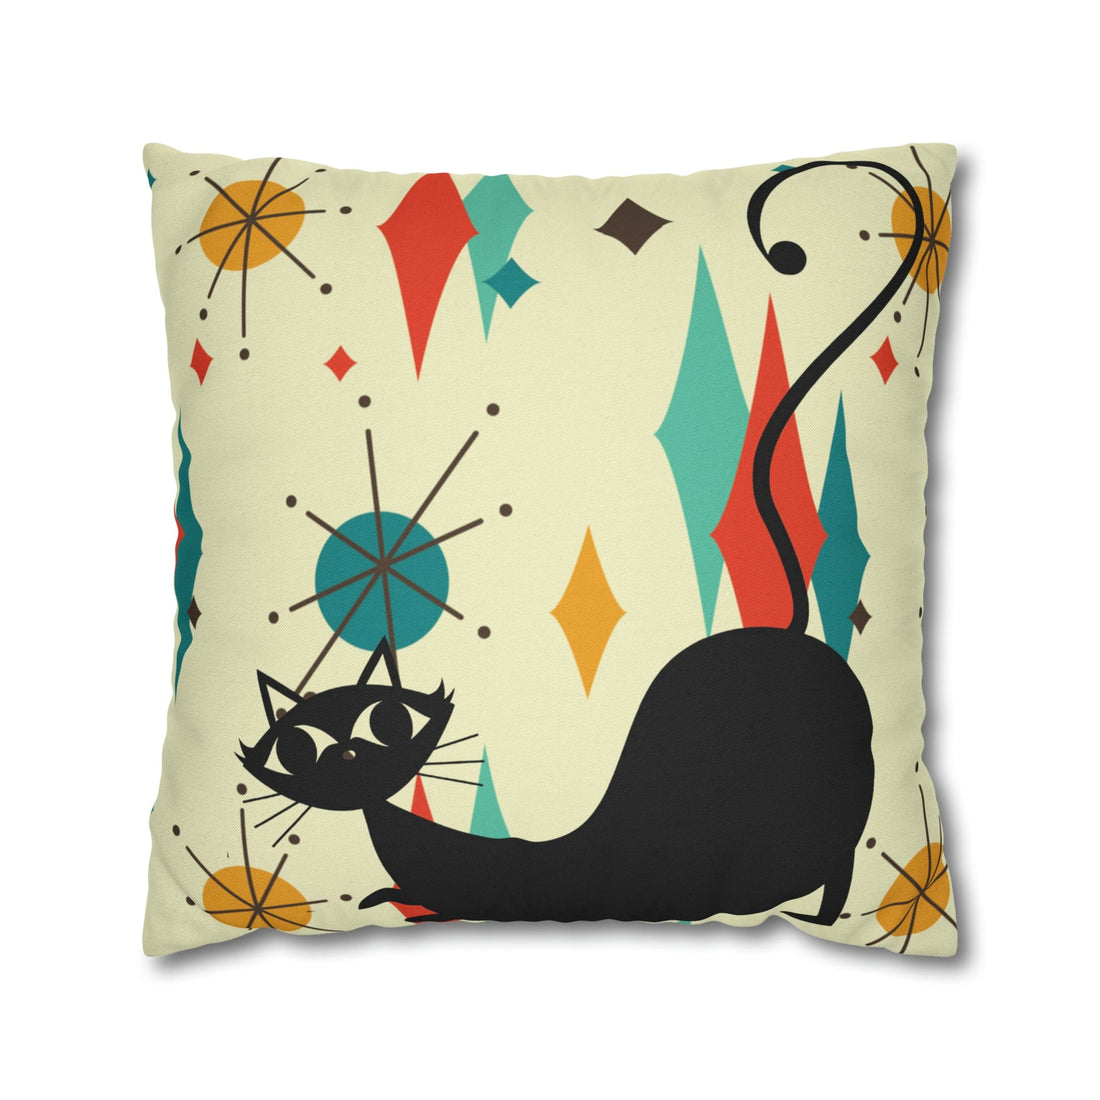 Kate McEnroe New York Retro Atomic Cat Franciscan Diamond Starburst Throw Pillow Covers in Mid Century Modern Orange, Teal, Cream Hues Throw Pillow Covers 20&quot; × 20&quot; 23484792426119013027